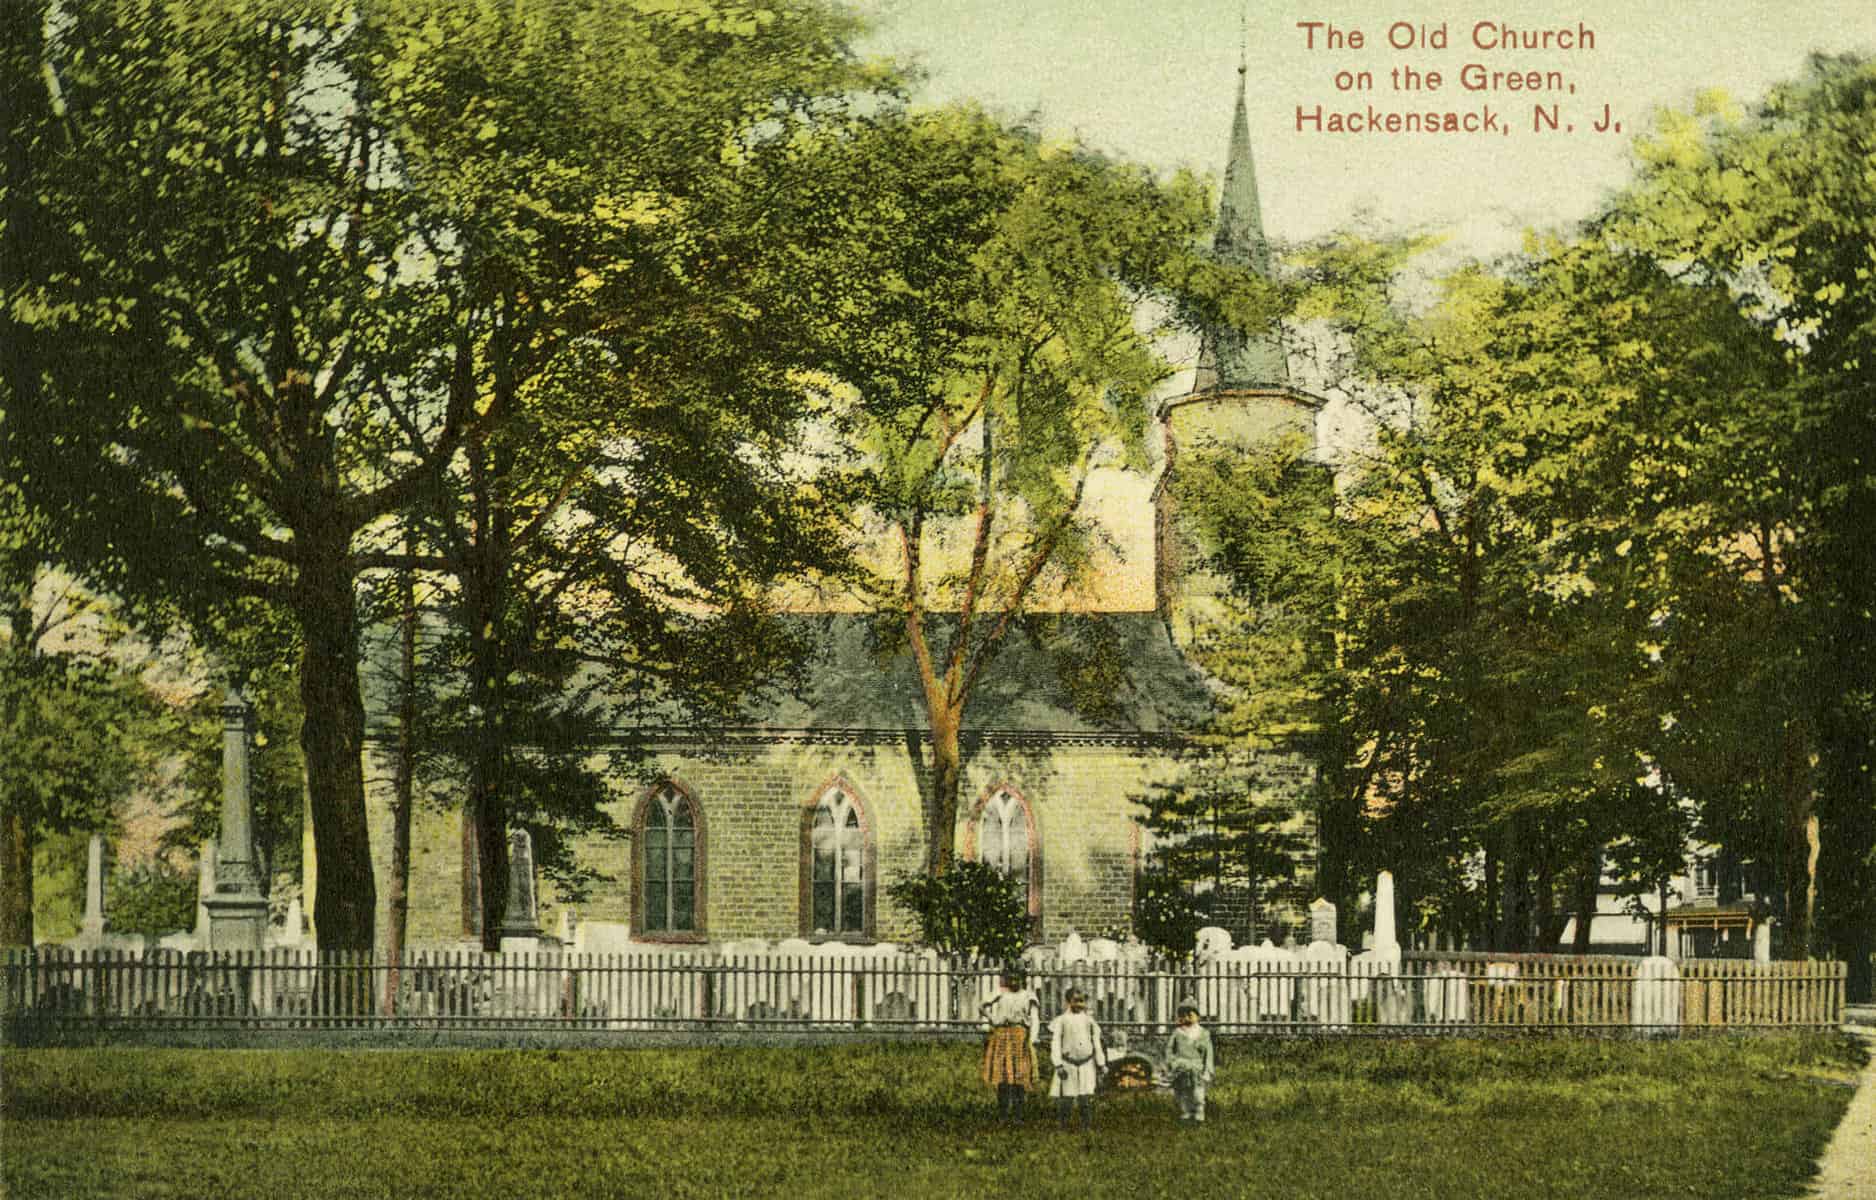 Historical Photo Of The Old Church On The Green (Dutch Church On The Green) In Hackensack NJ